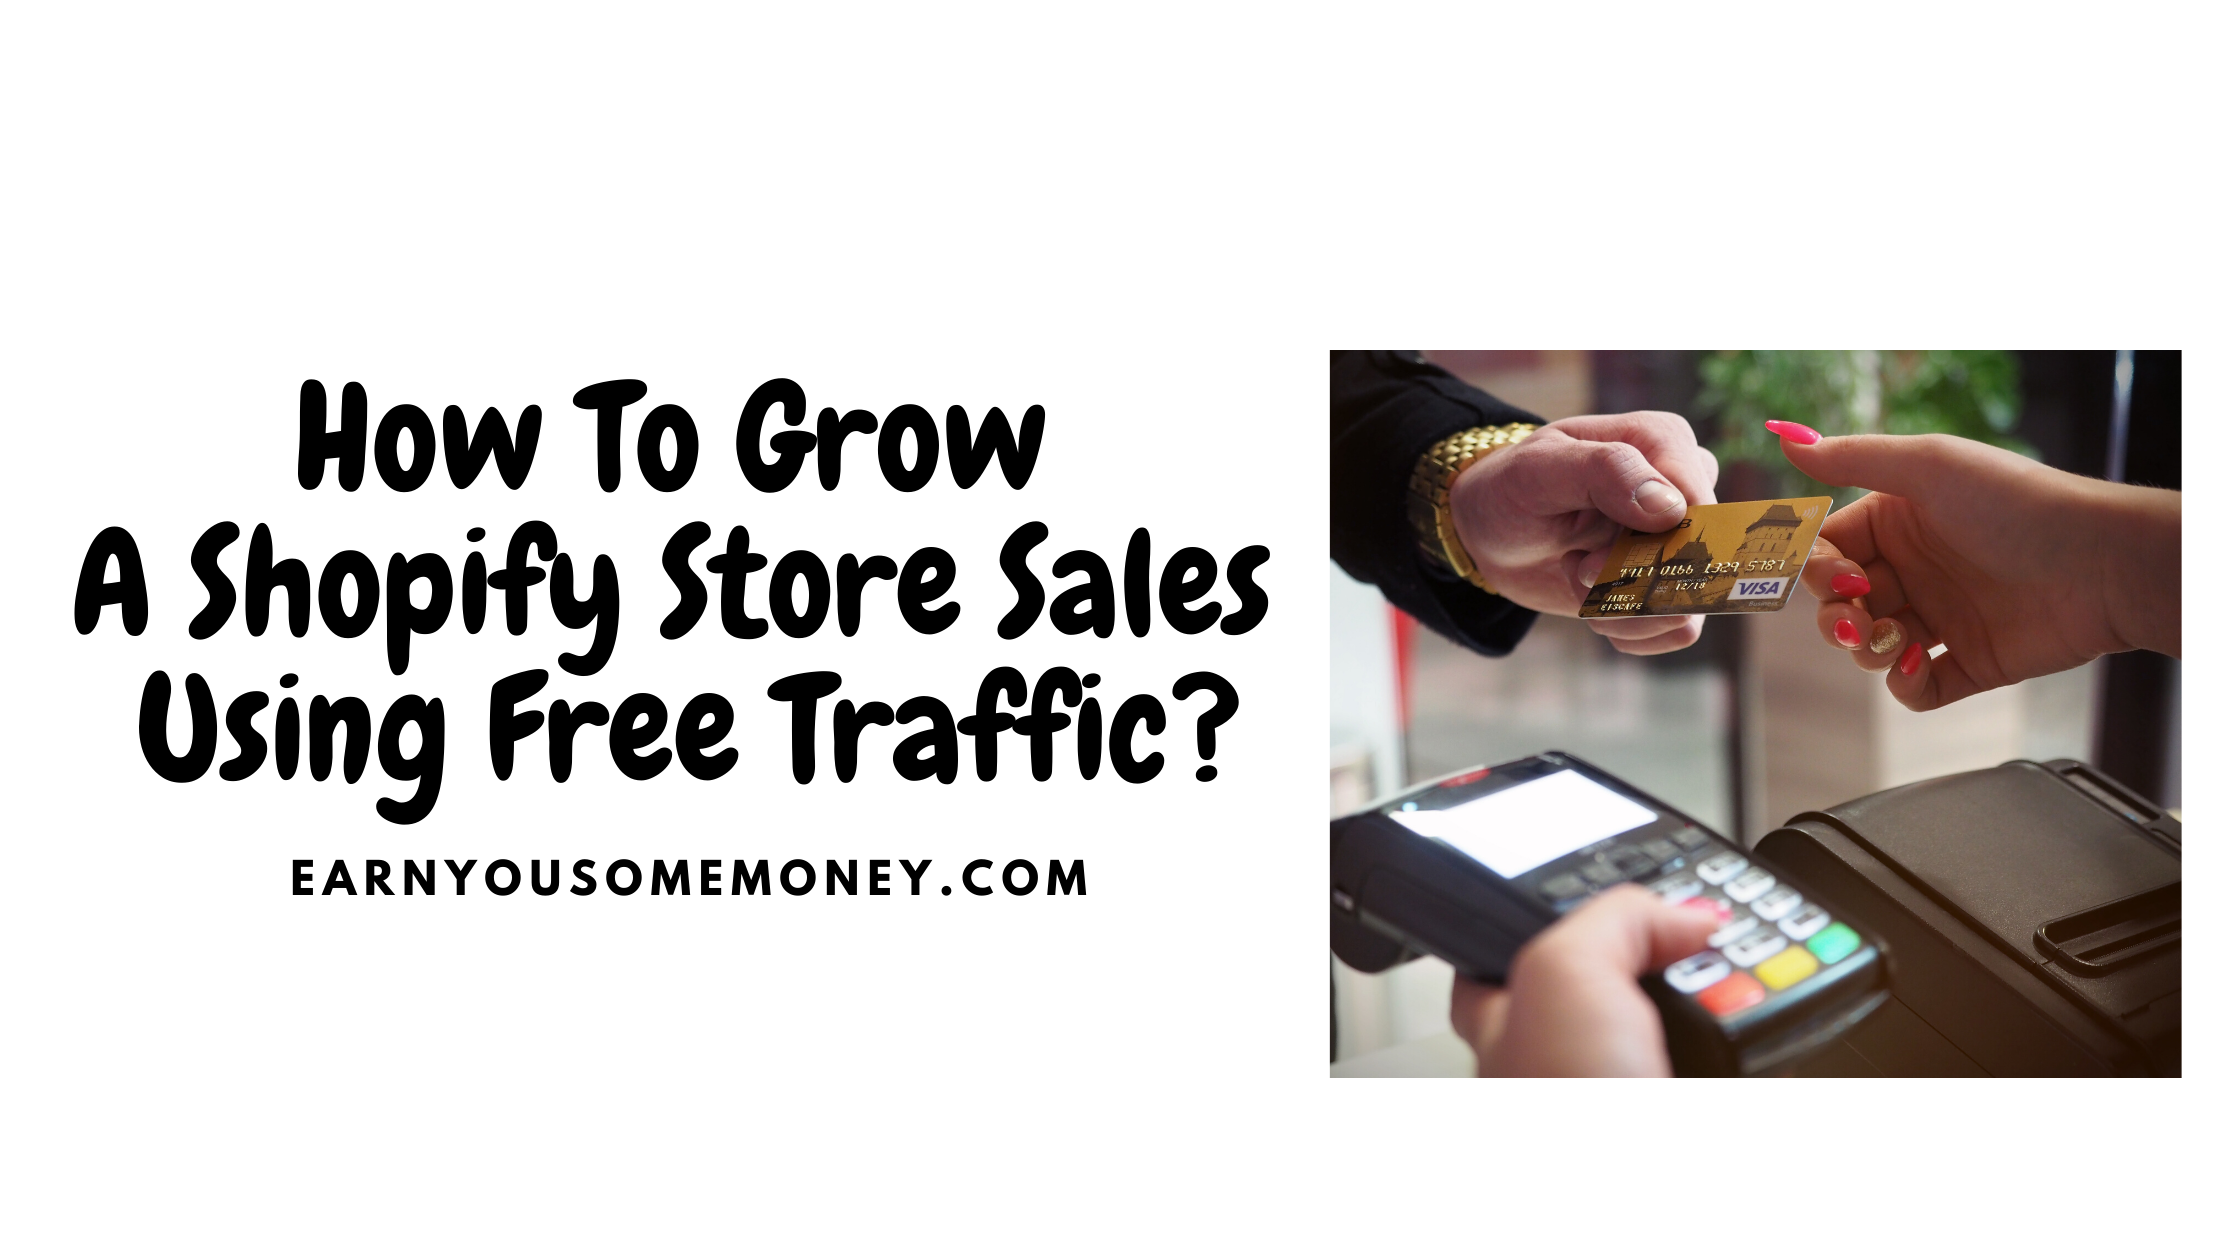 How To Grow A Shopify Store Sales Using Free Traffic